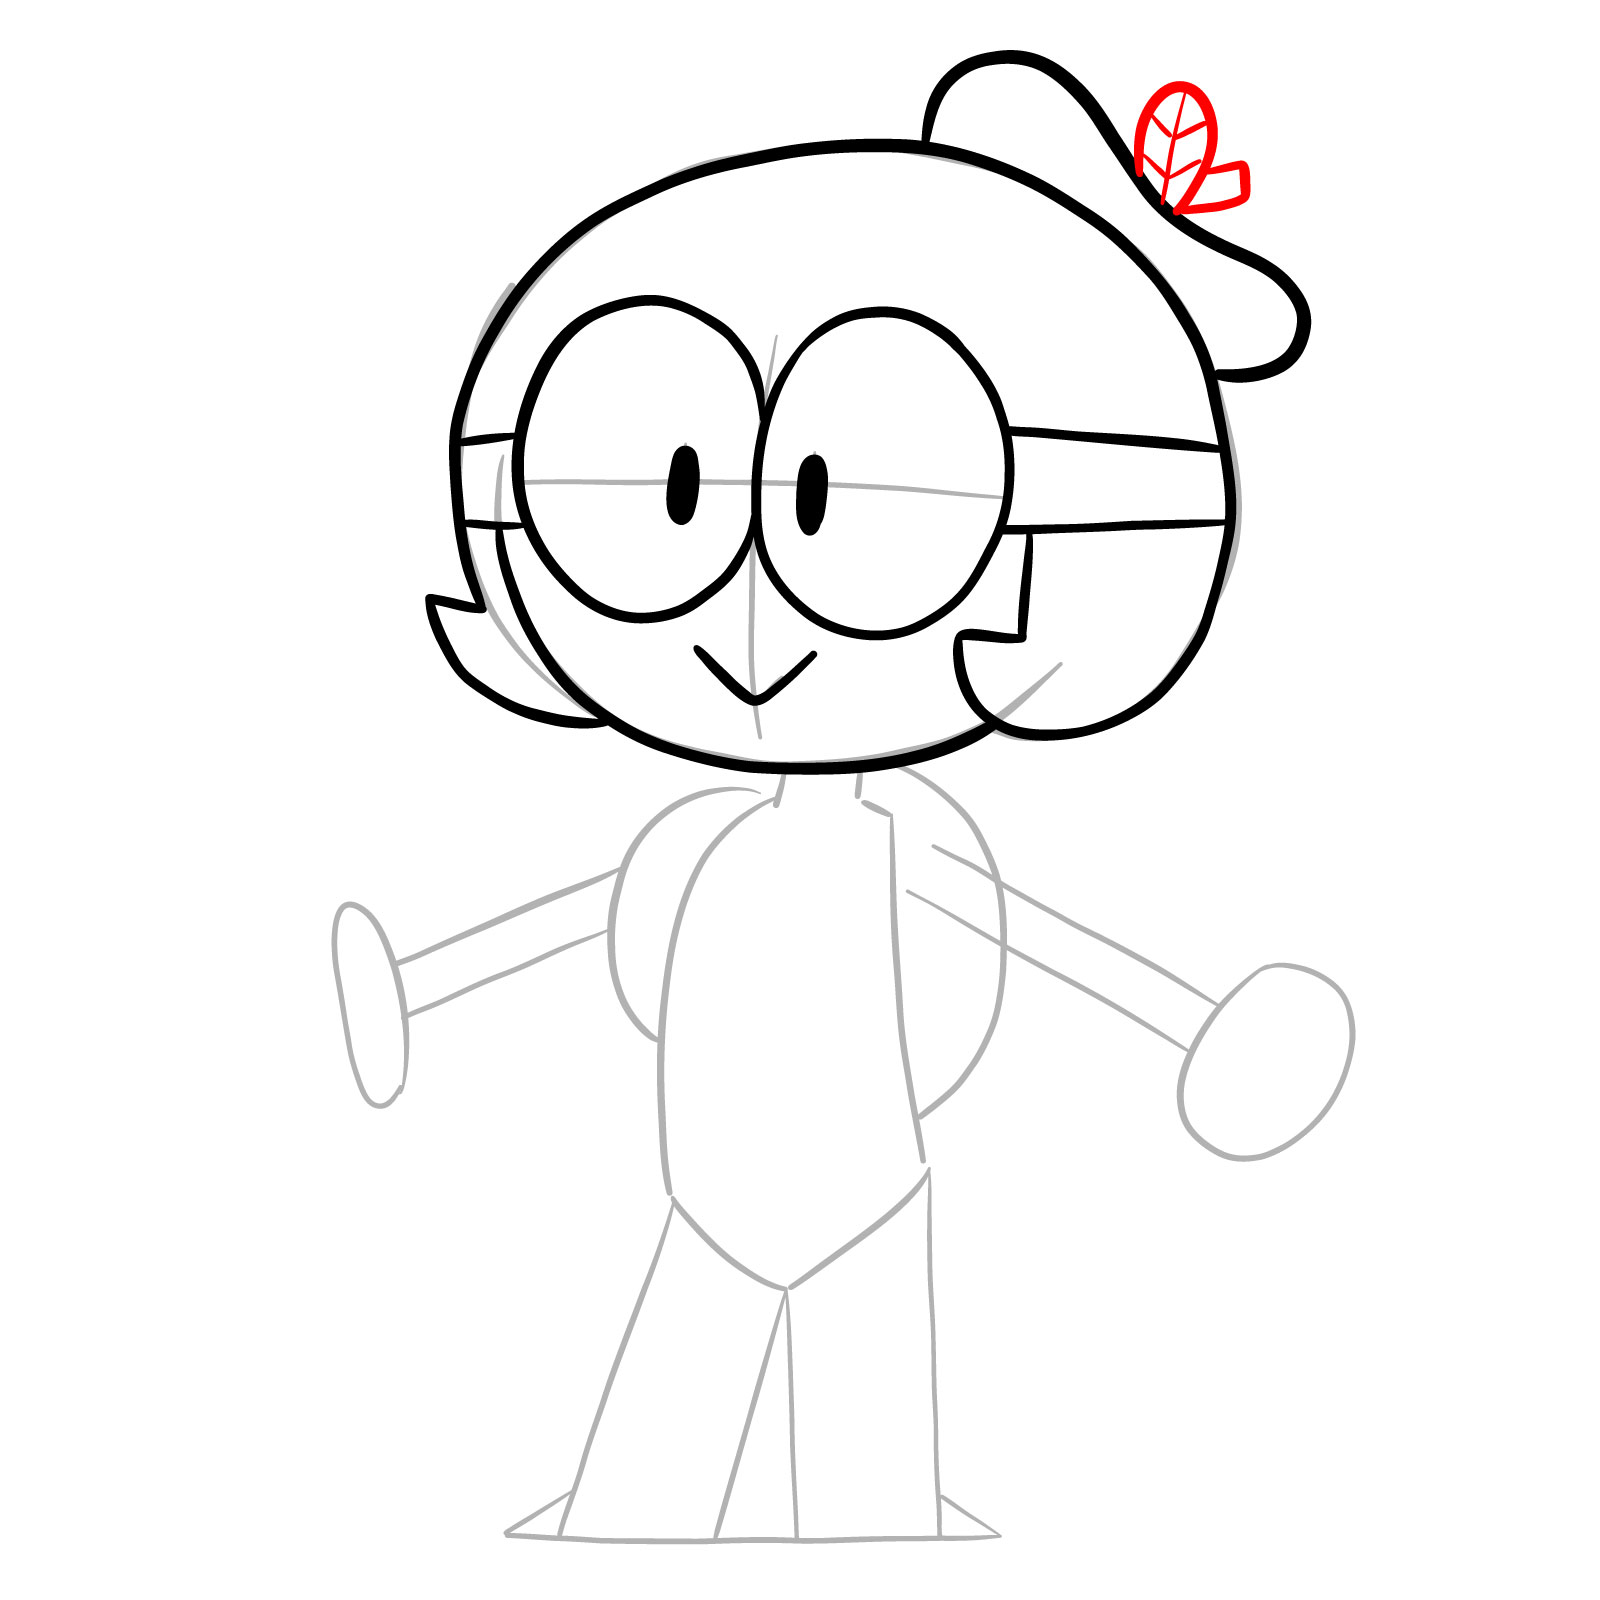 How to draw Dendy from OK K.O.! - step 10